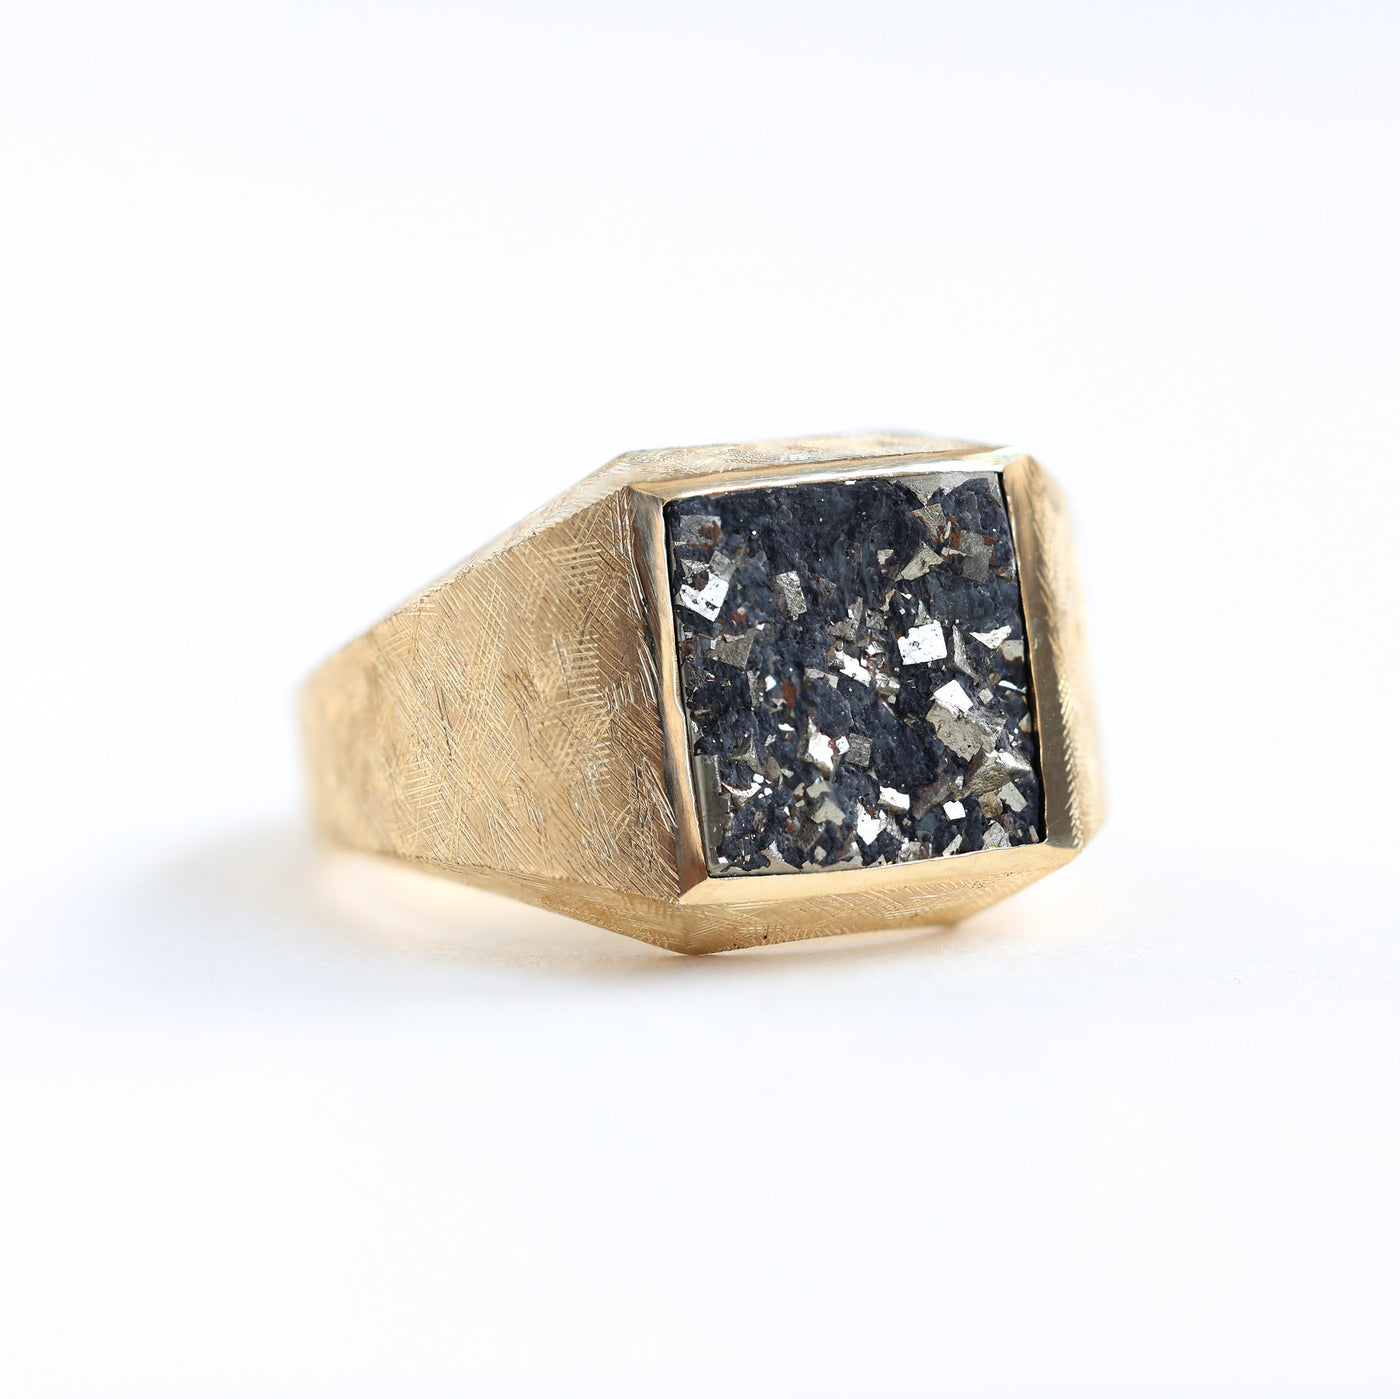 Pyrite crystal signet ring in 14k gold, customizable gemstone options available.